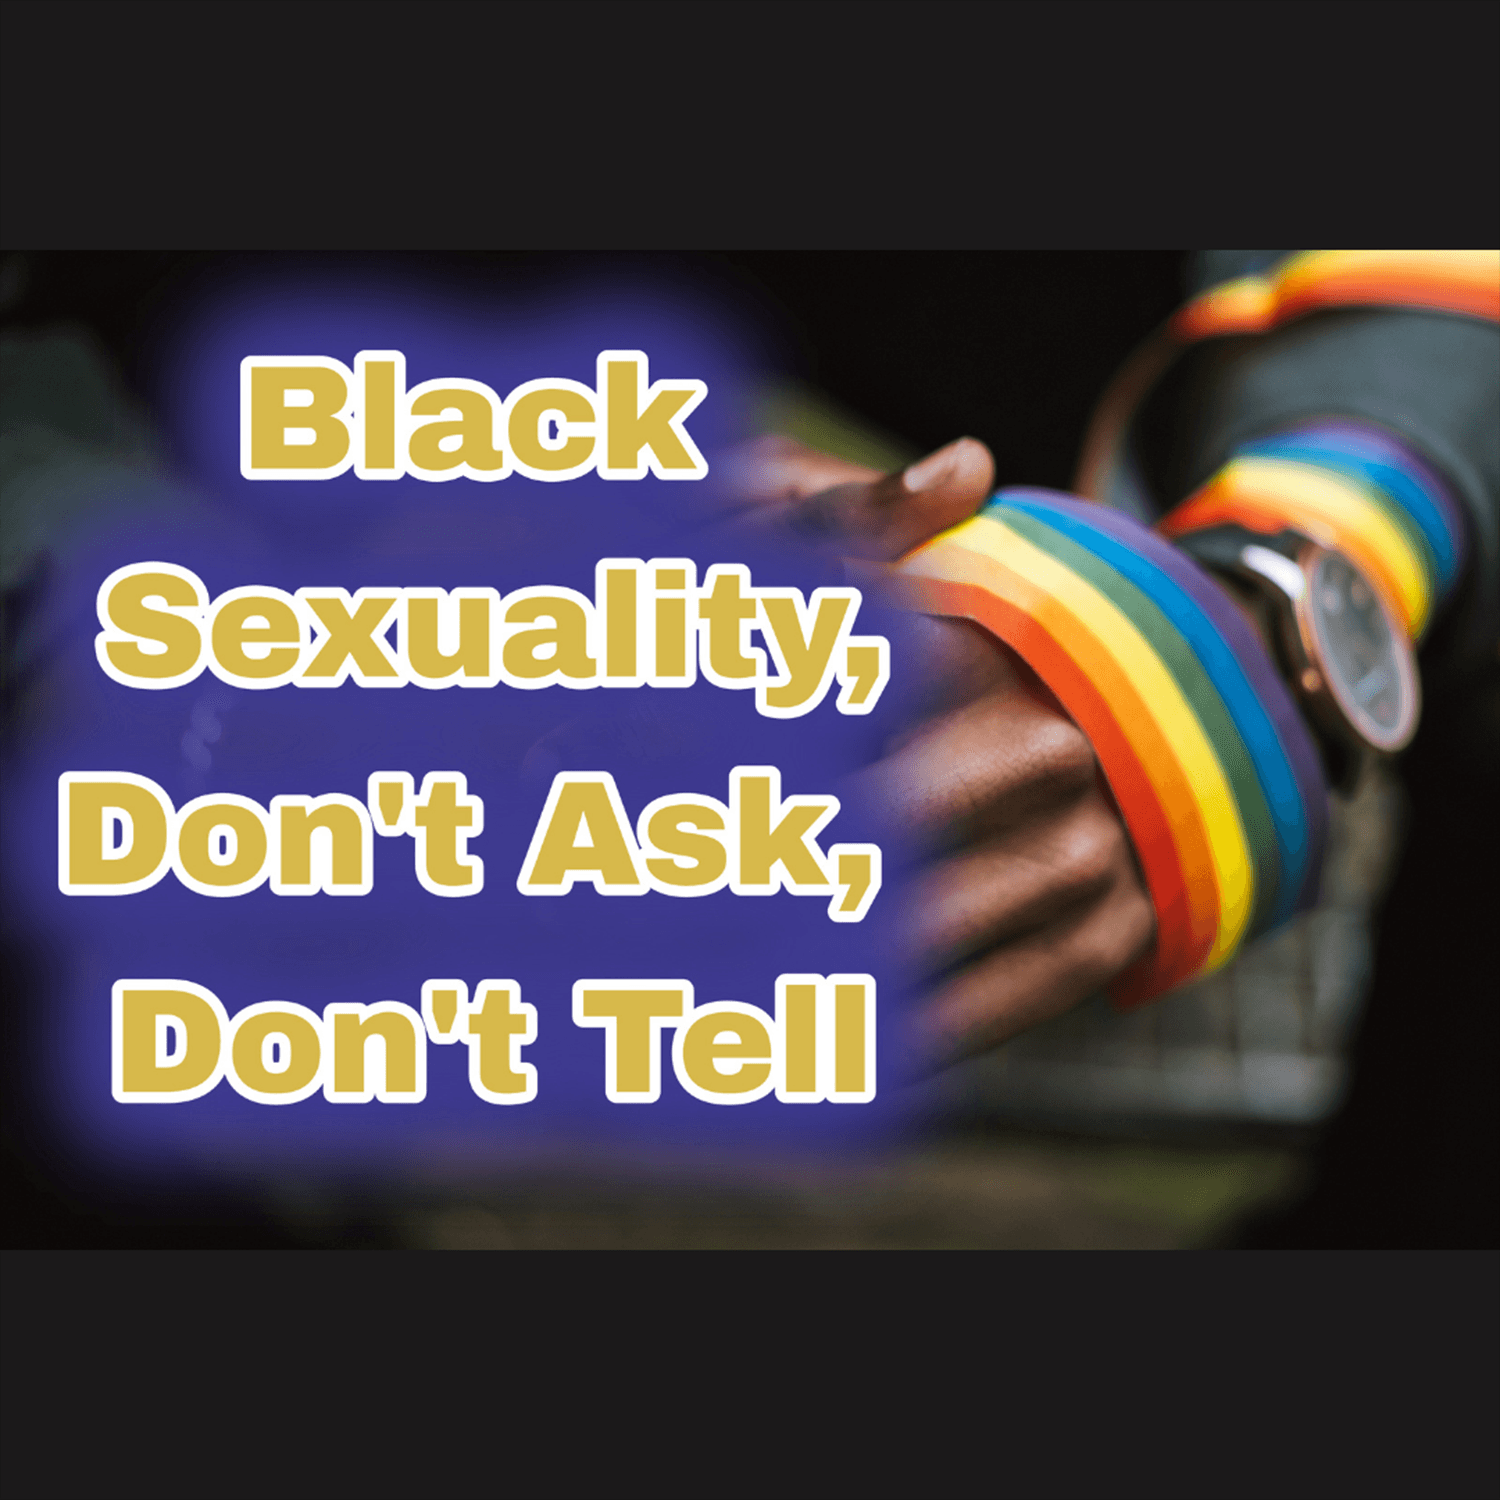 Thumbnail for "Black Sexuality: Don’t Ask Don’t Tell".